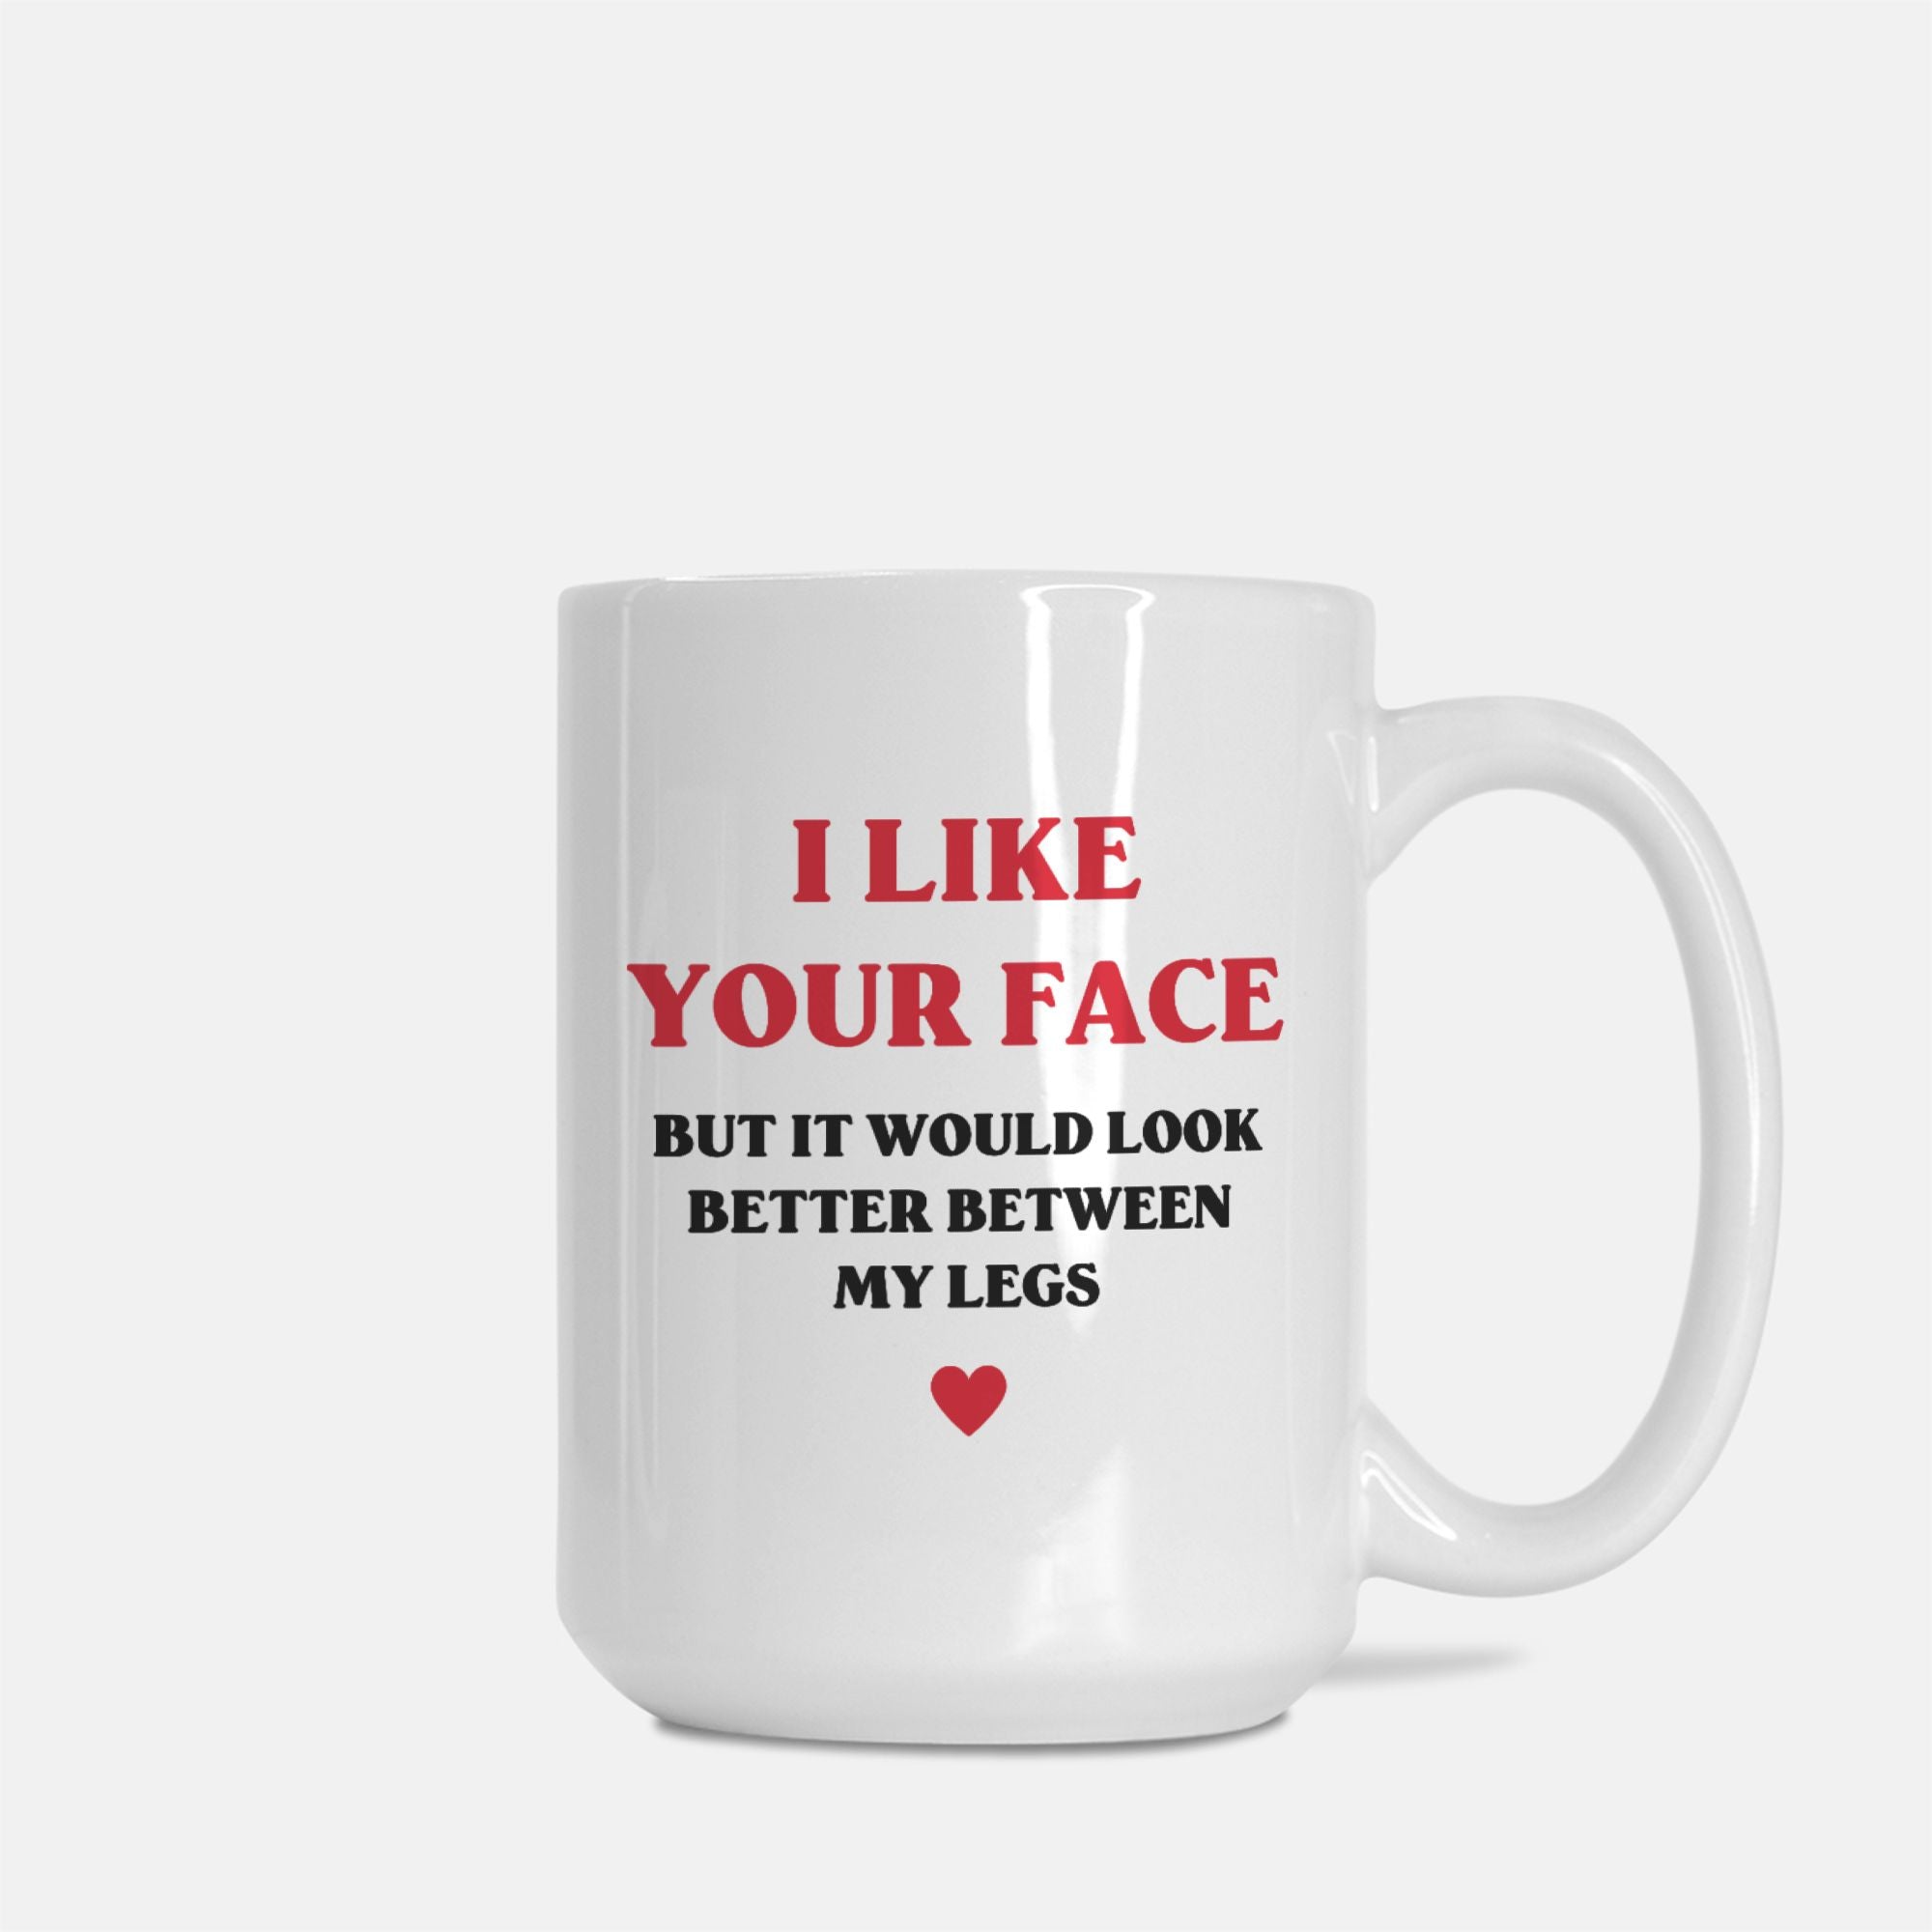 I Like Your Face But It Would Look Better Between My Legs Valentine's Day Mug - UntamedEgo LLC.